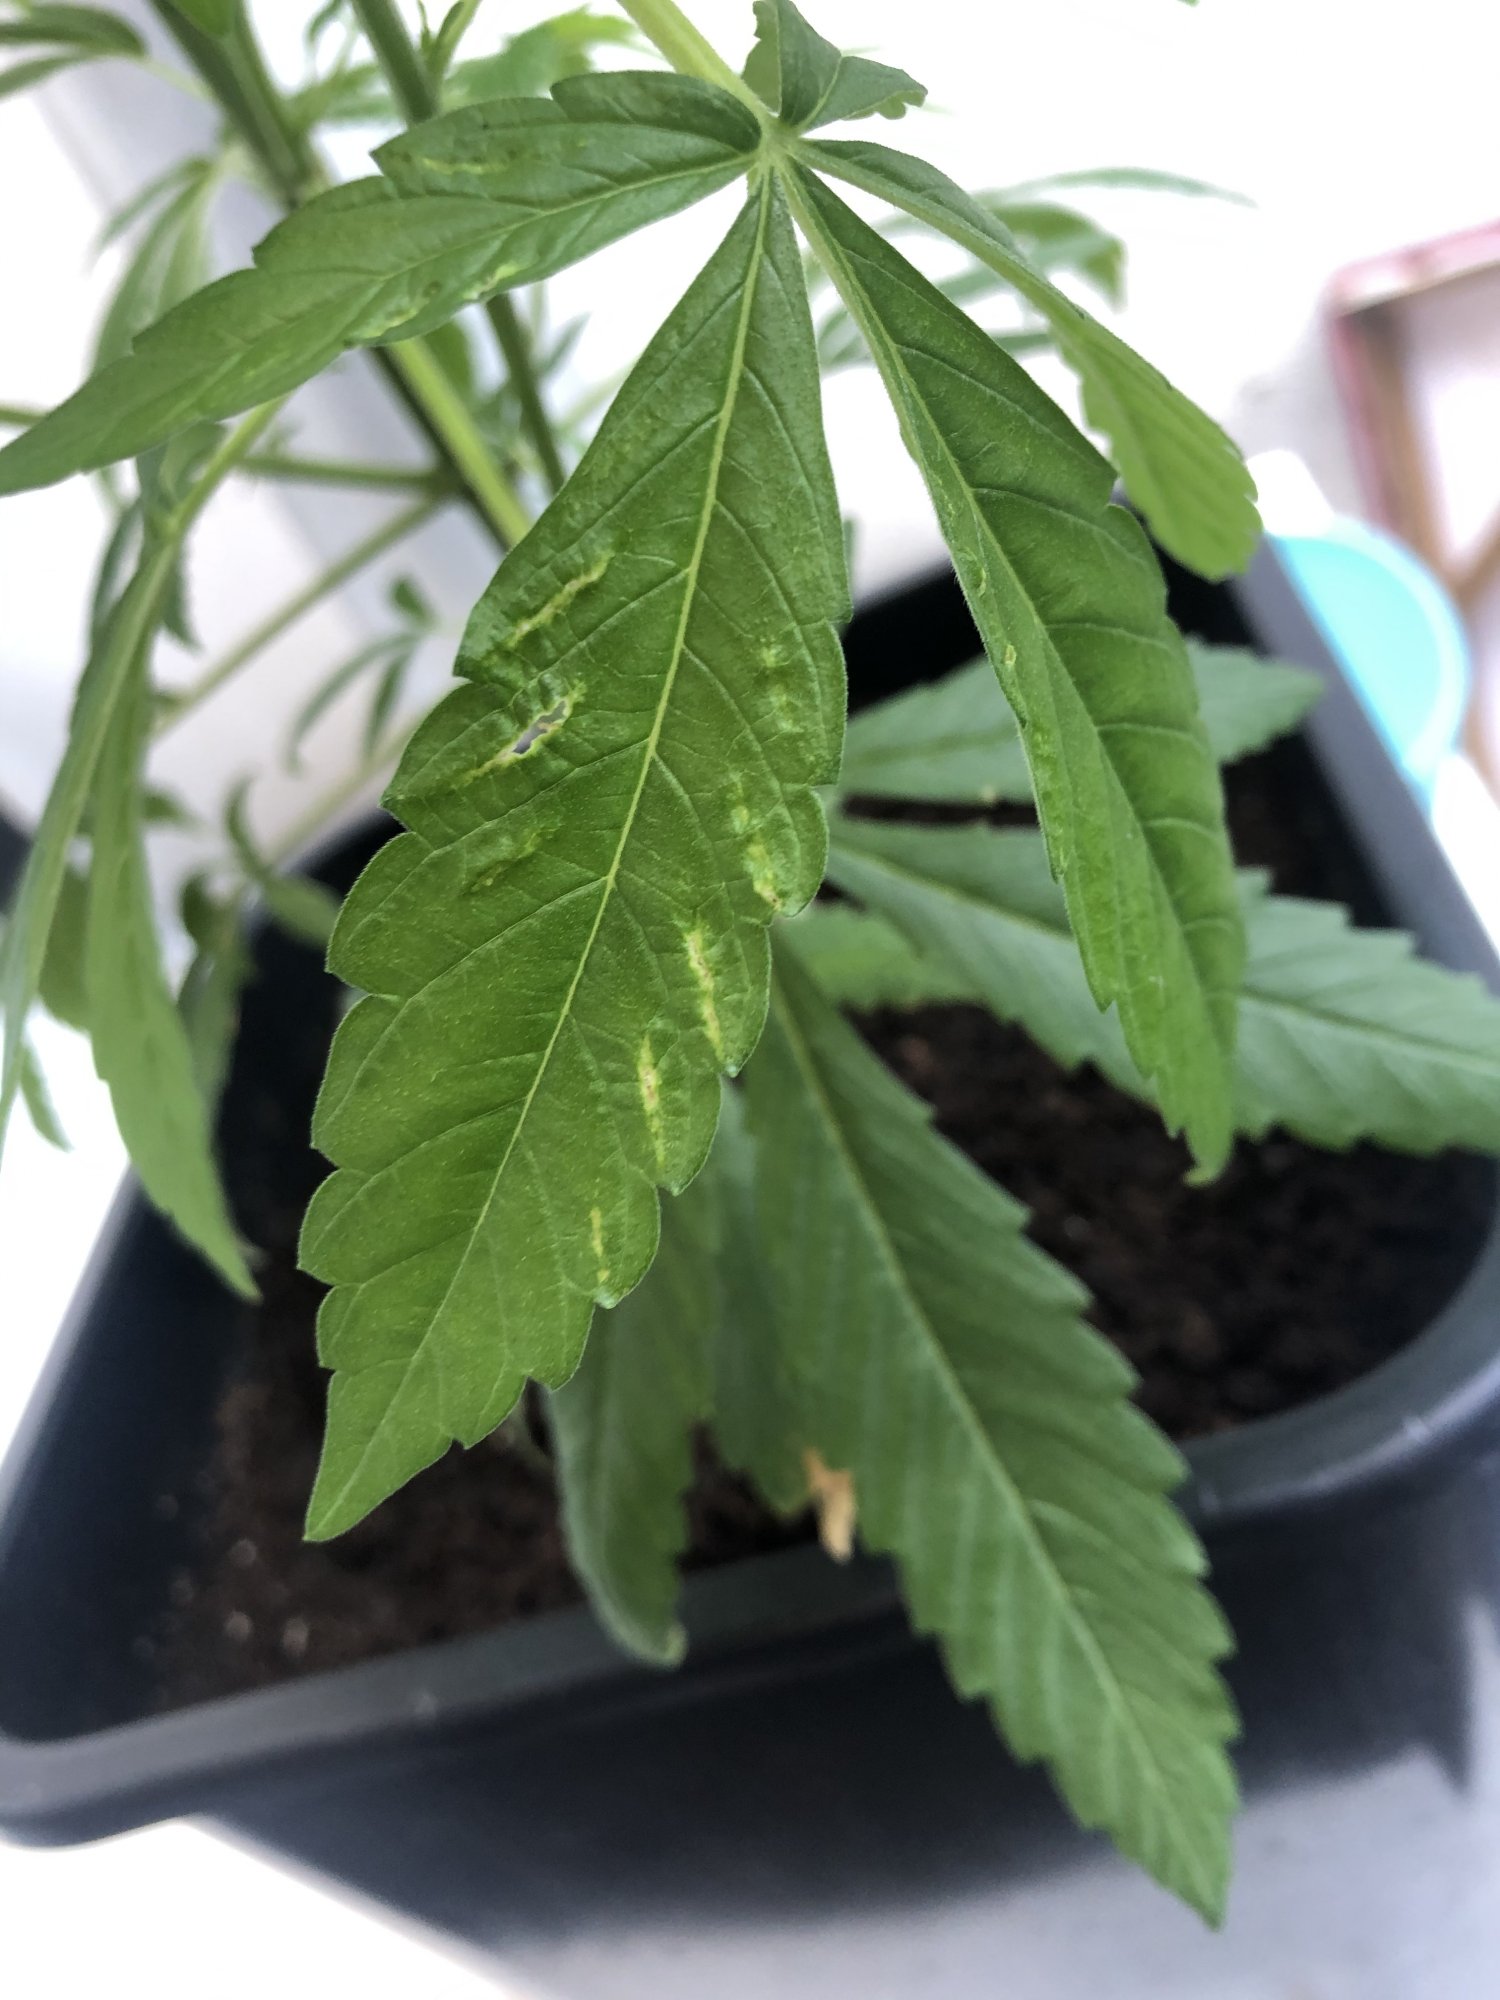 Holes appearing in leafs help and info please 5